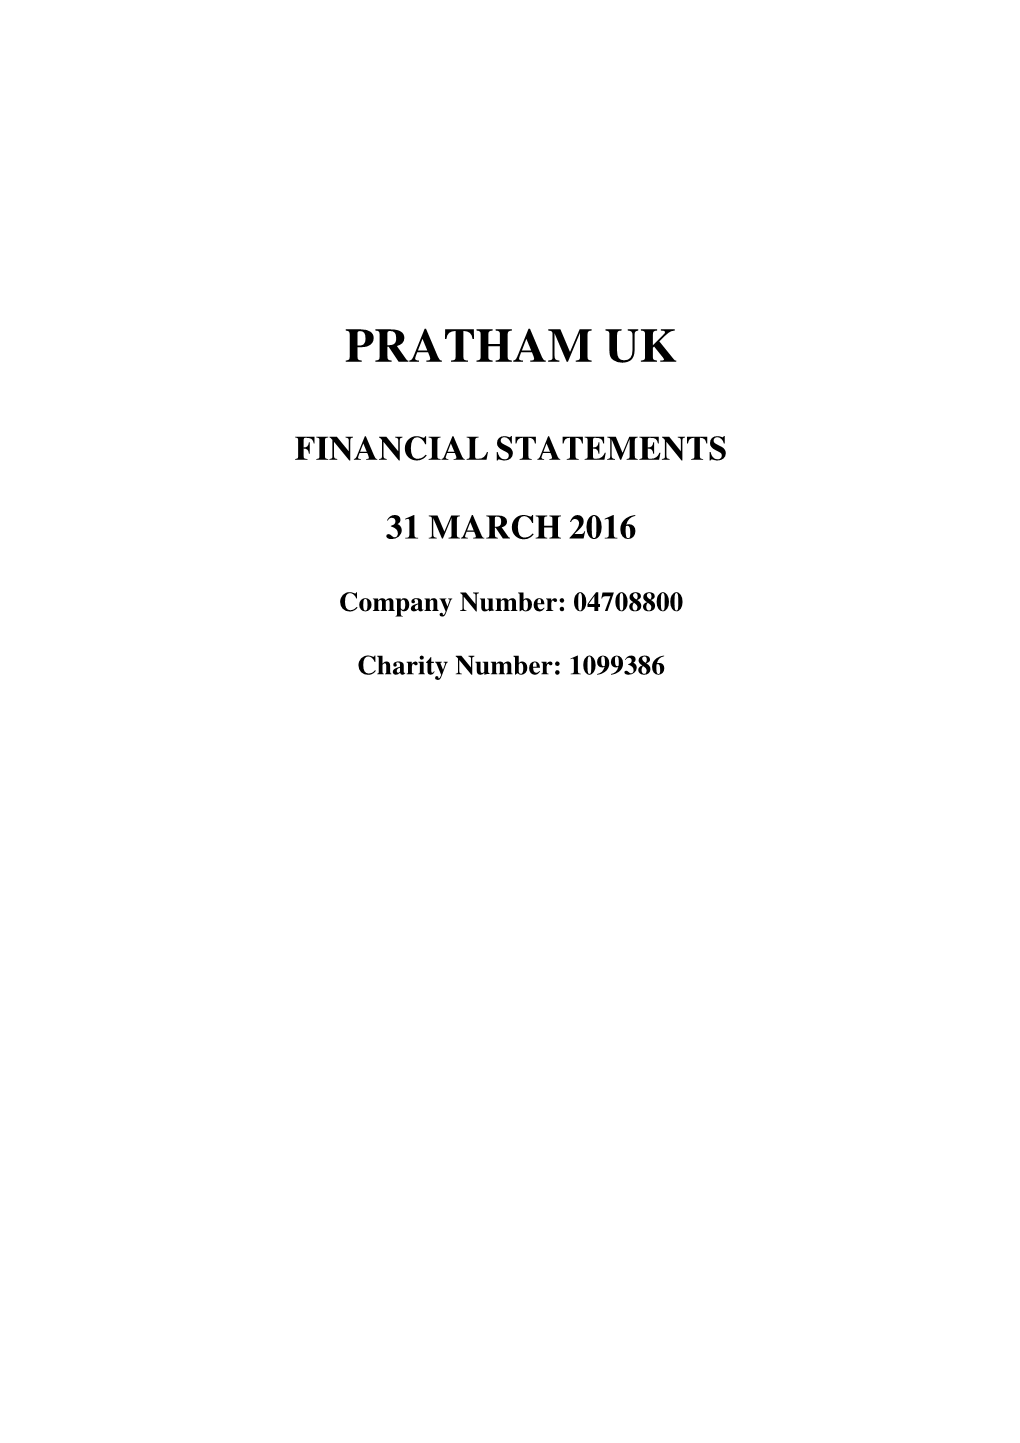 Financial Statements 31 March 2016